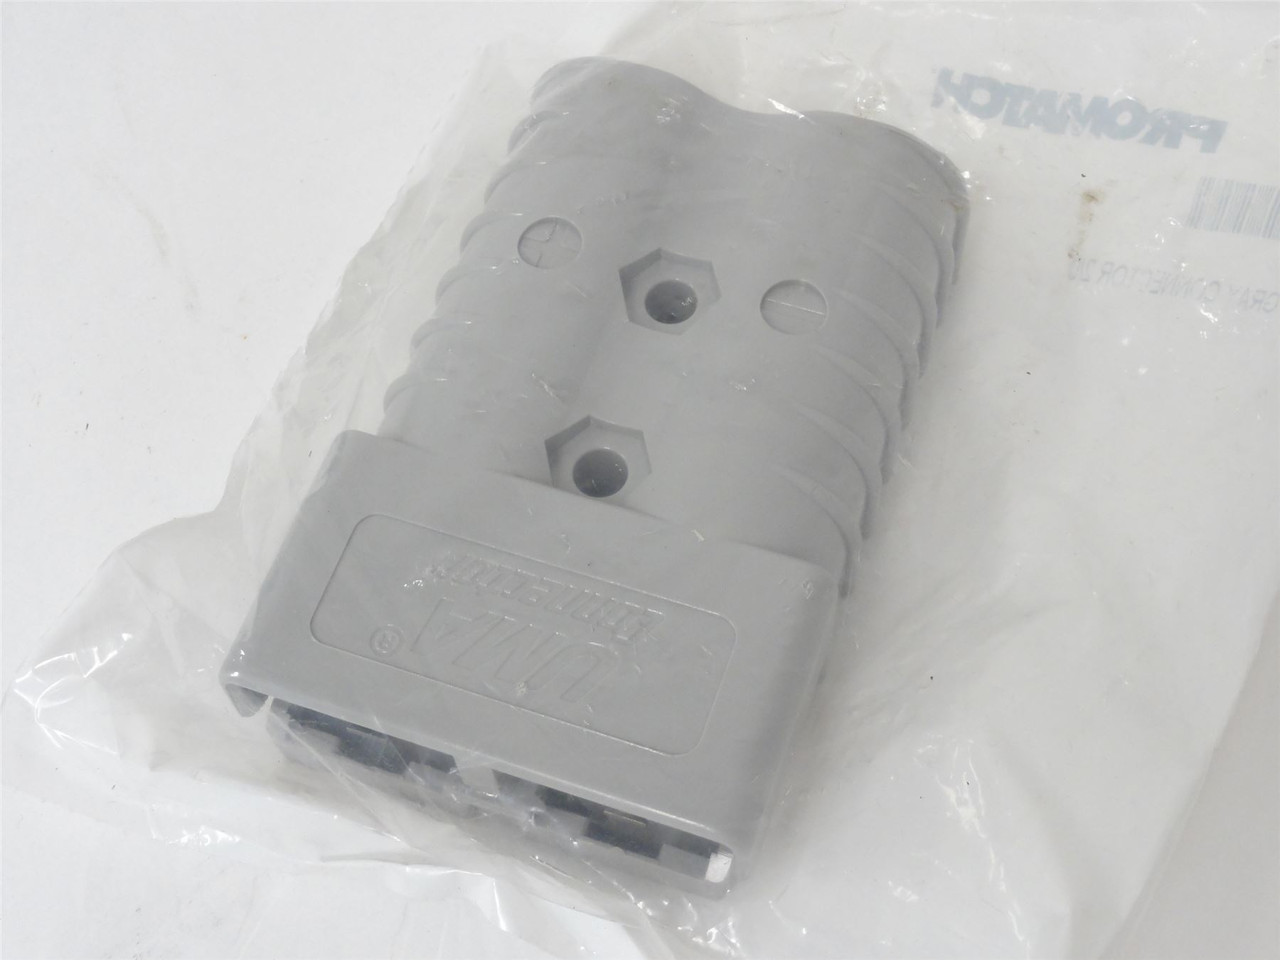 Promatch 2I5300; Gray Connector; SB350; w/ Contactor Size 2/0